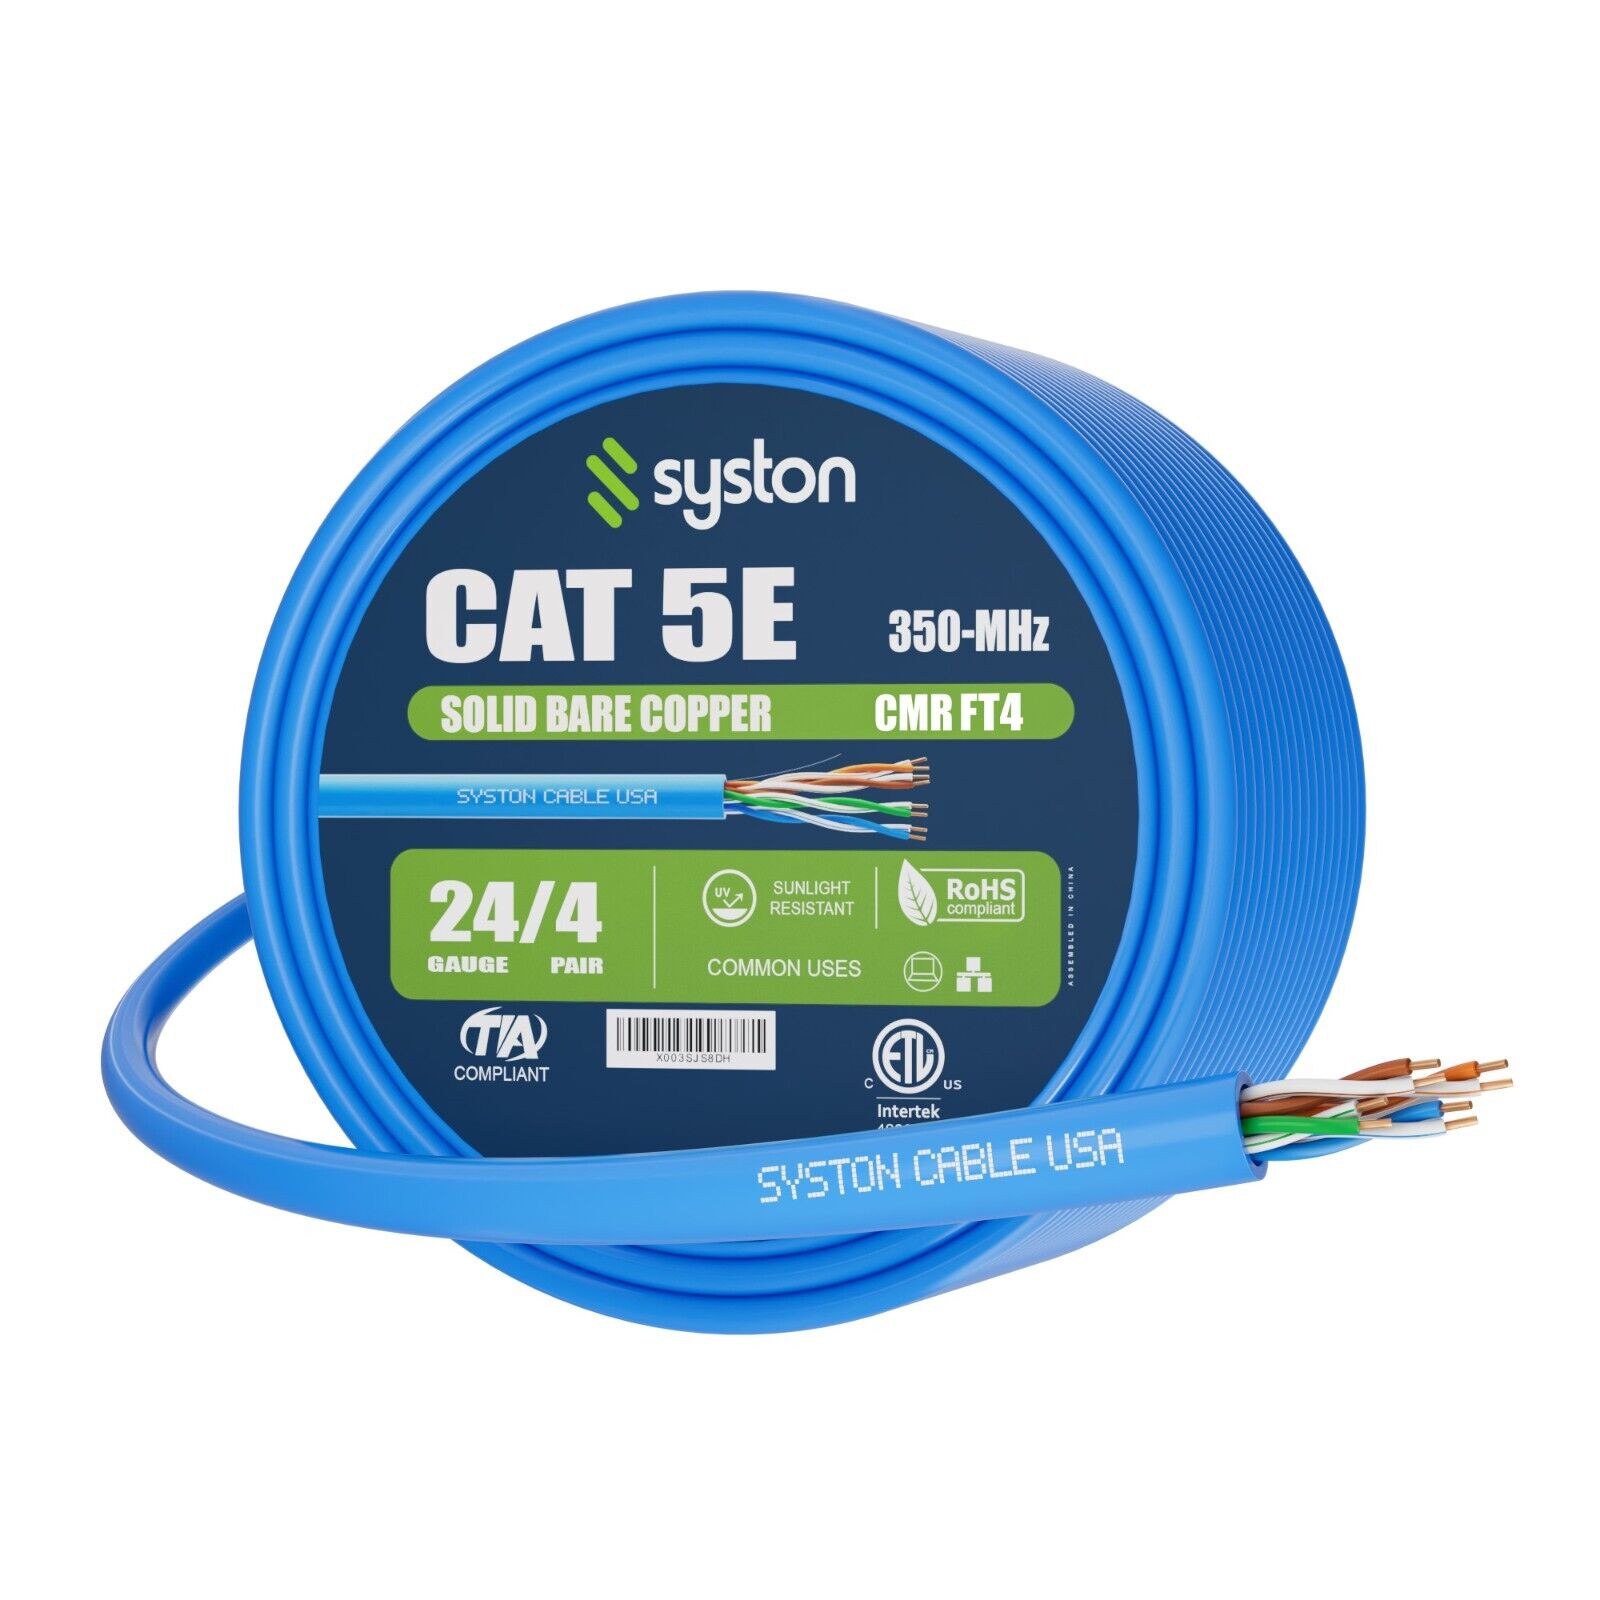 Syston Cat 5e Ethernet Network Cable 350MHz 24AWG UTP Solid Copper Wire-CMR Bulk